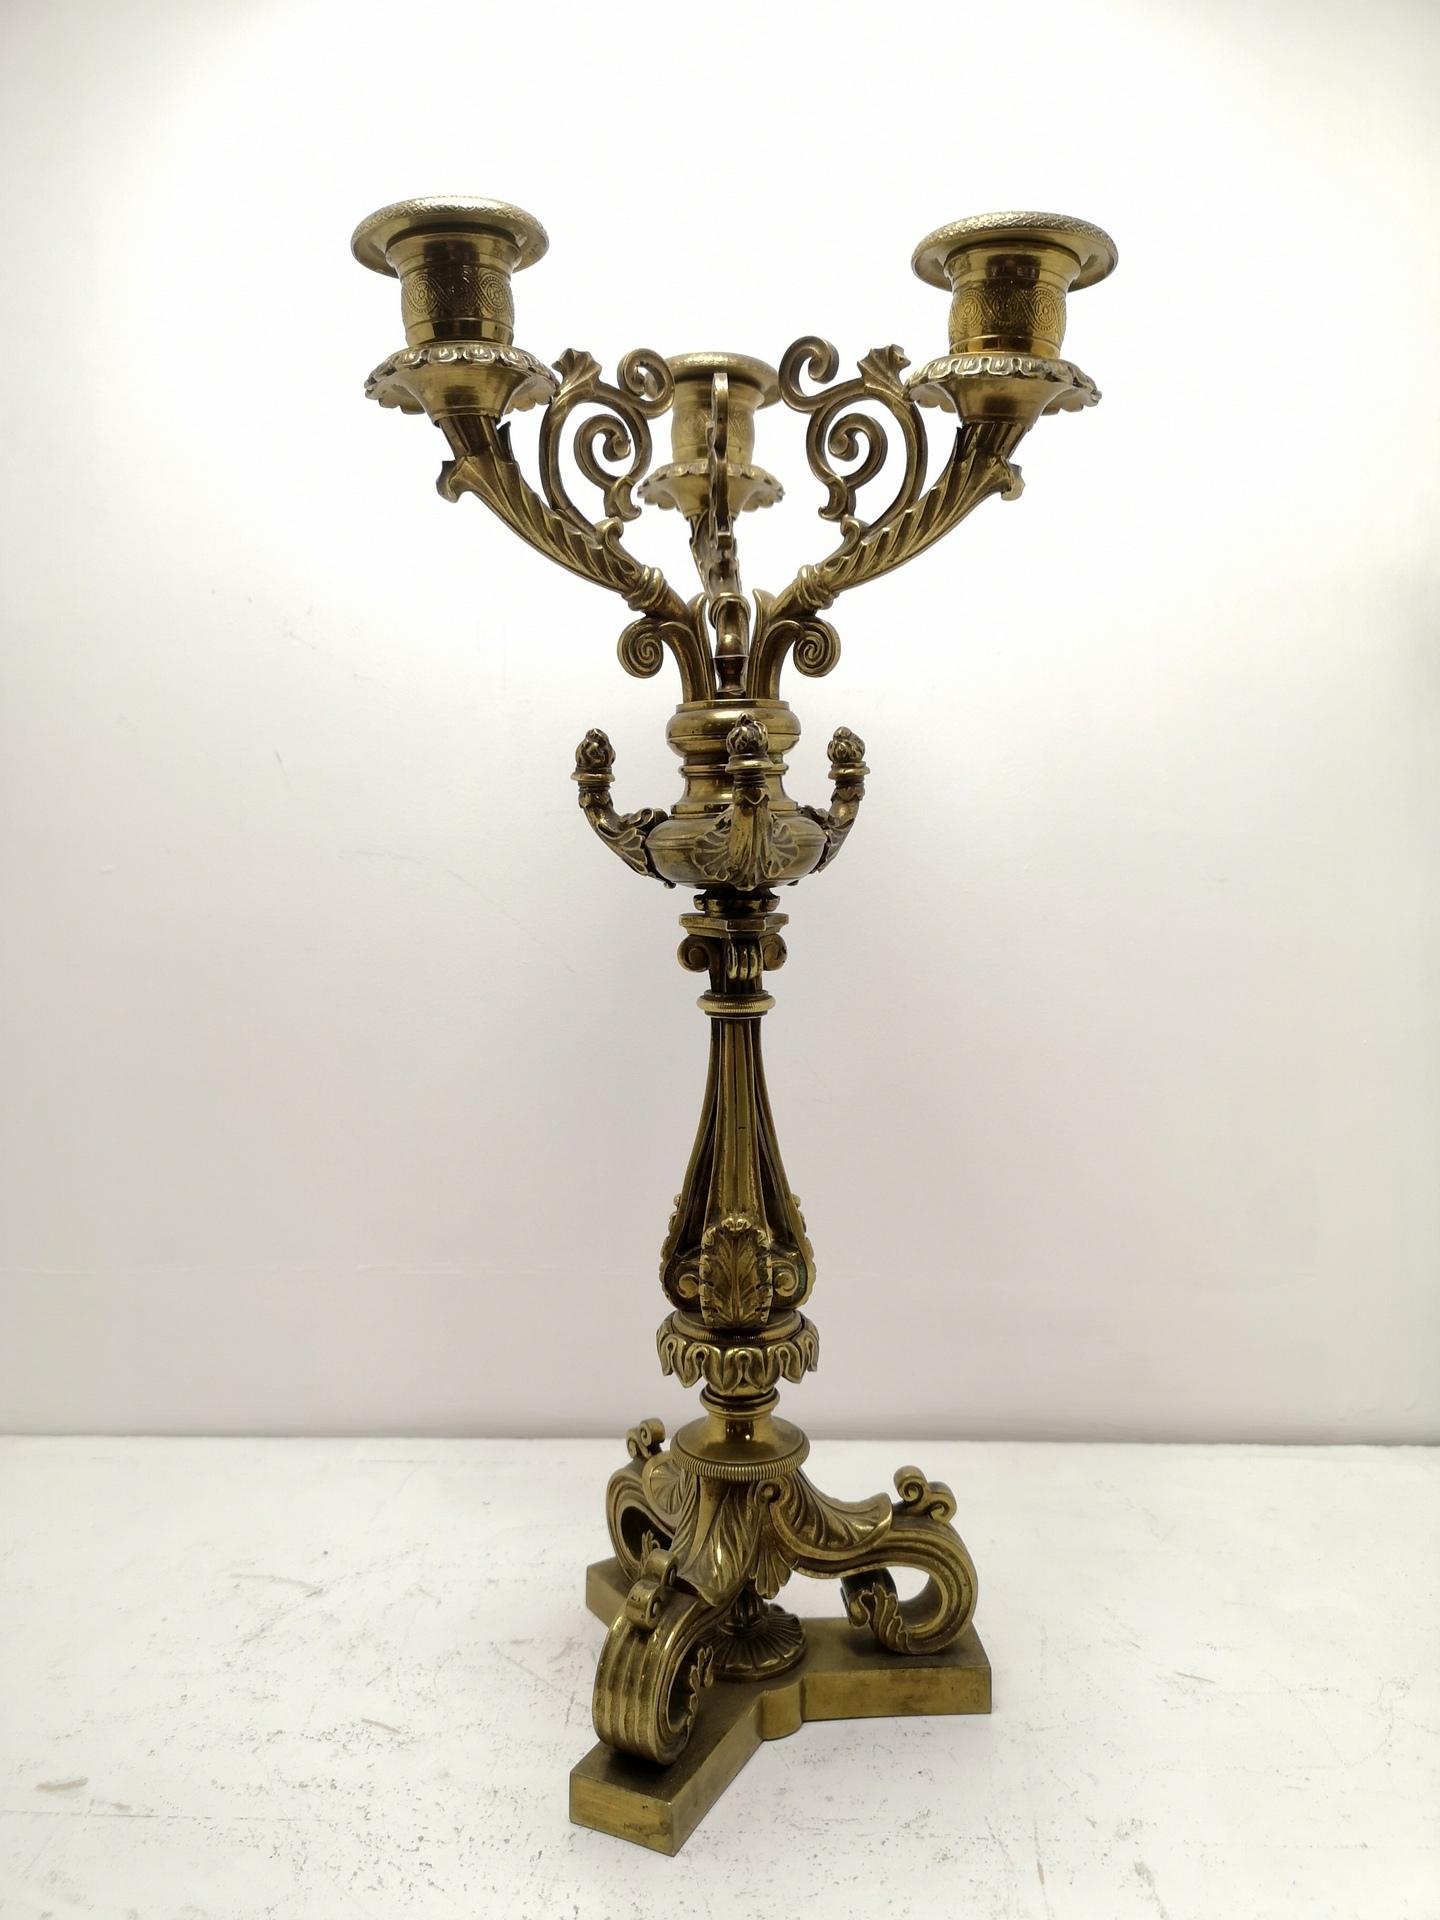 Sophisticated, three headed cast bronze candelabra, with highly detailed chiseled parts- great condition.